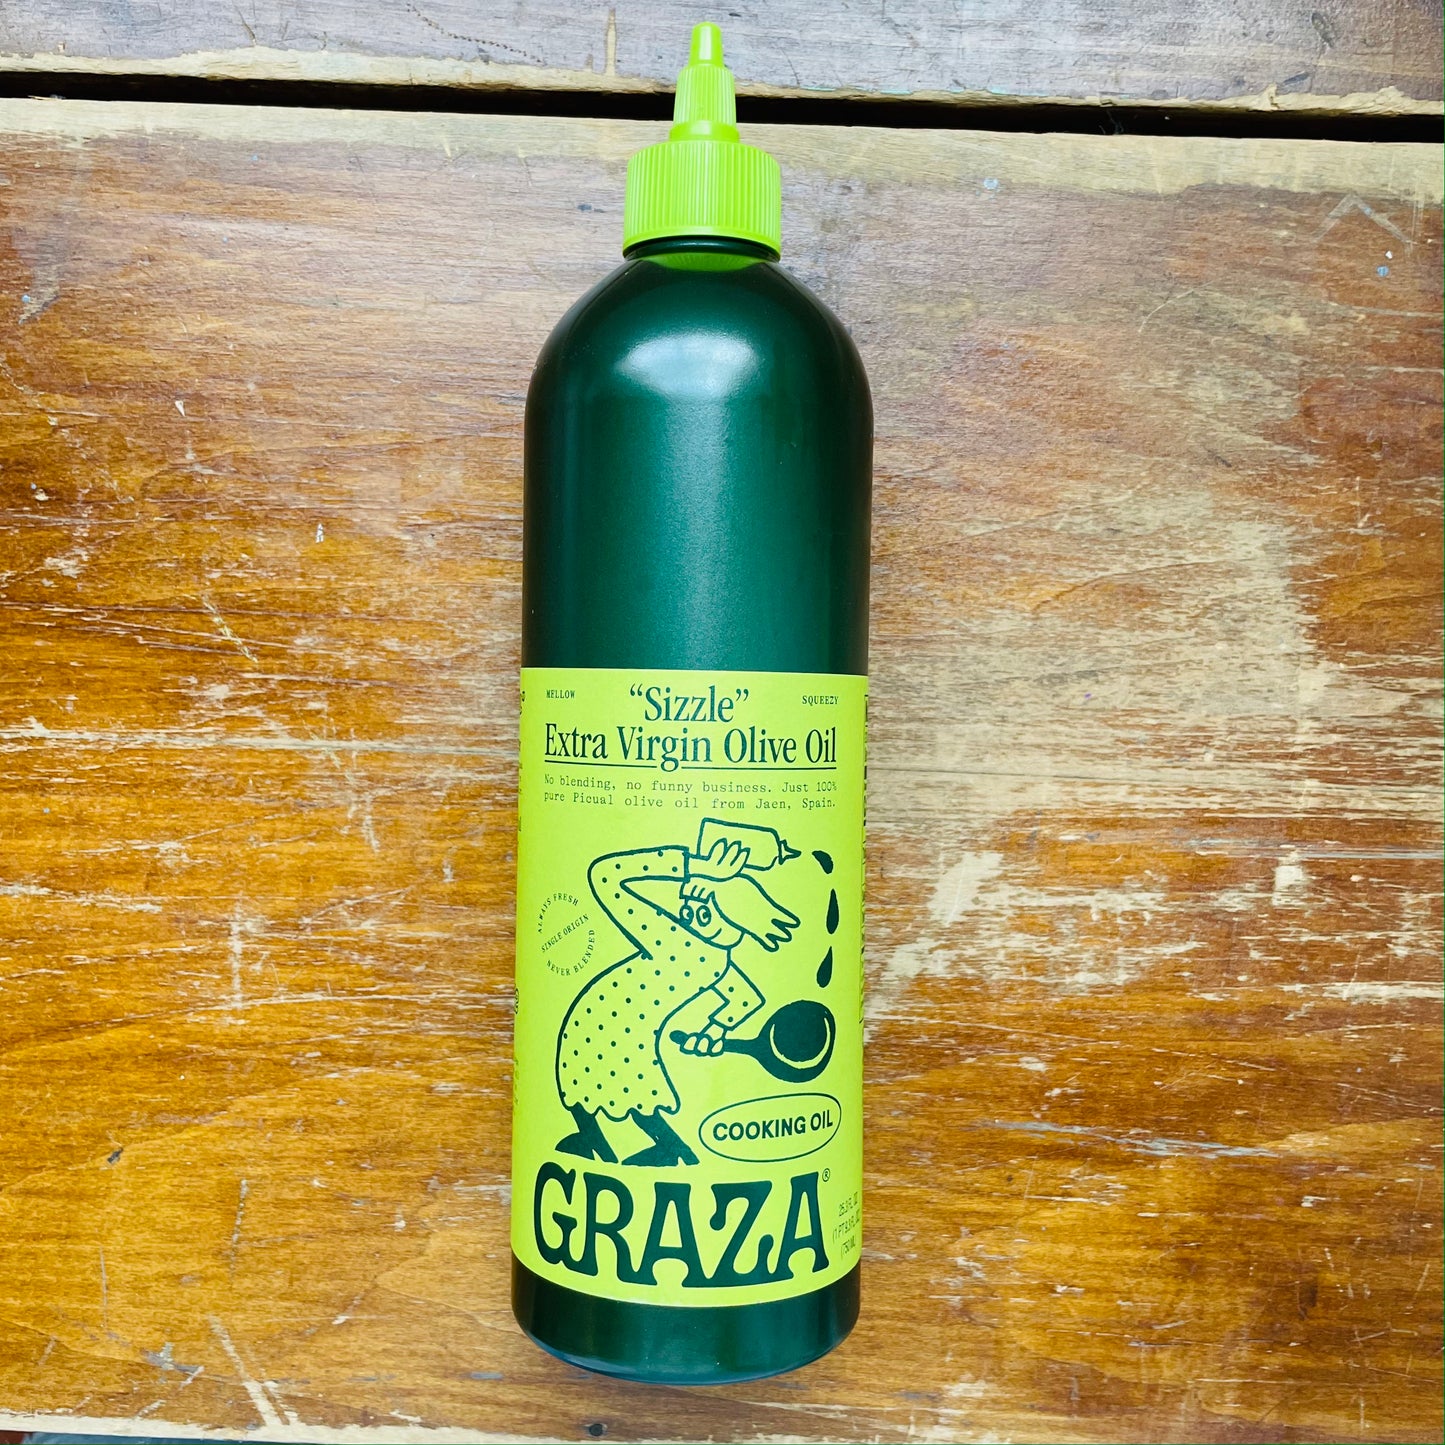 "Sizzle" Extra Virgin Olive Oil